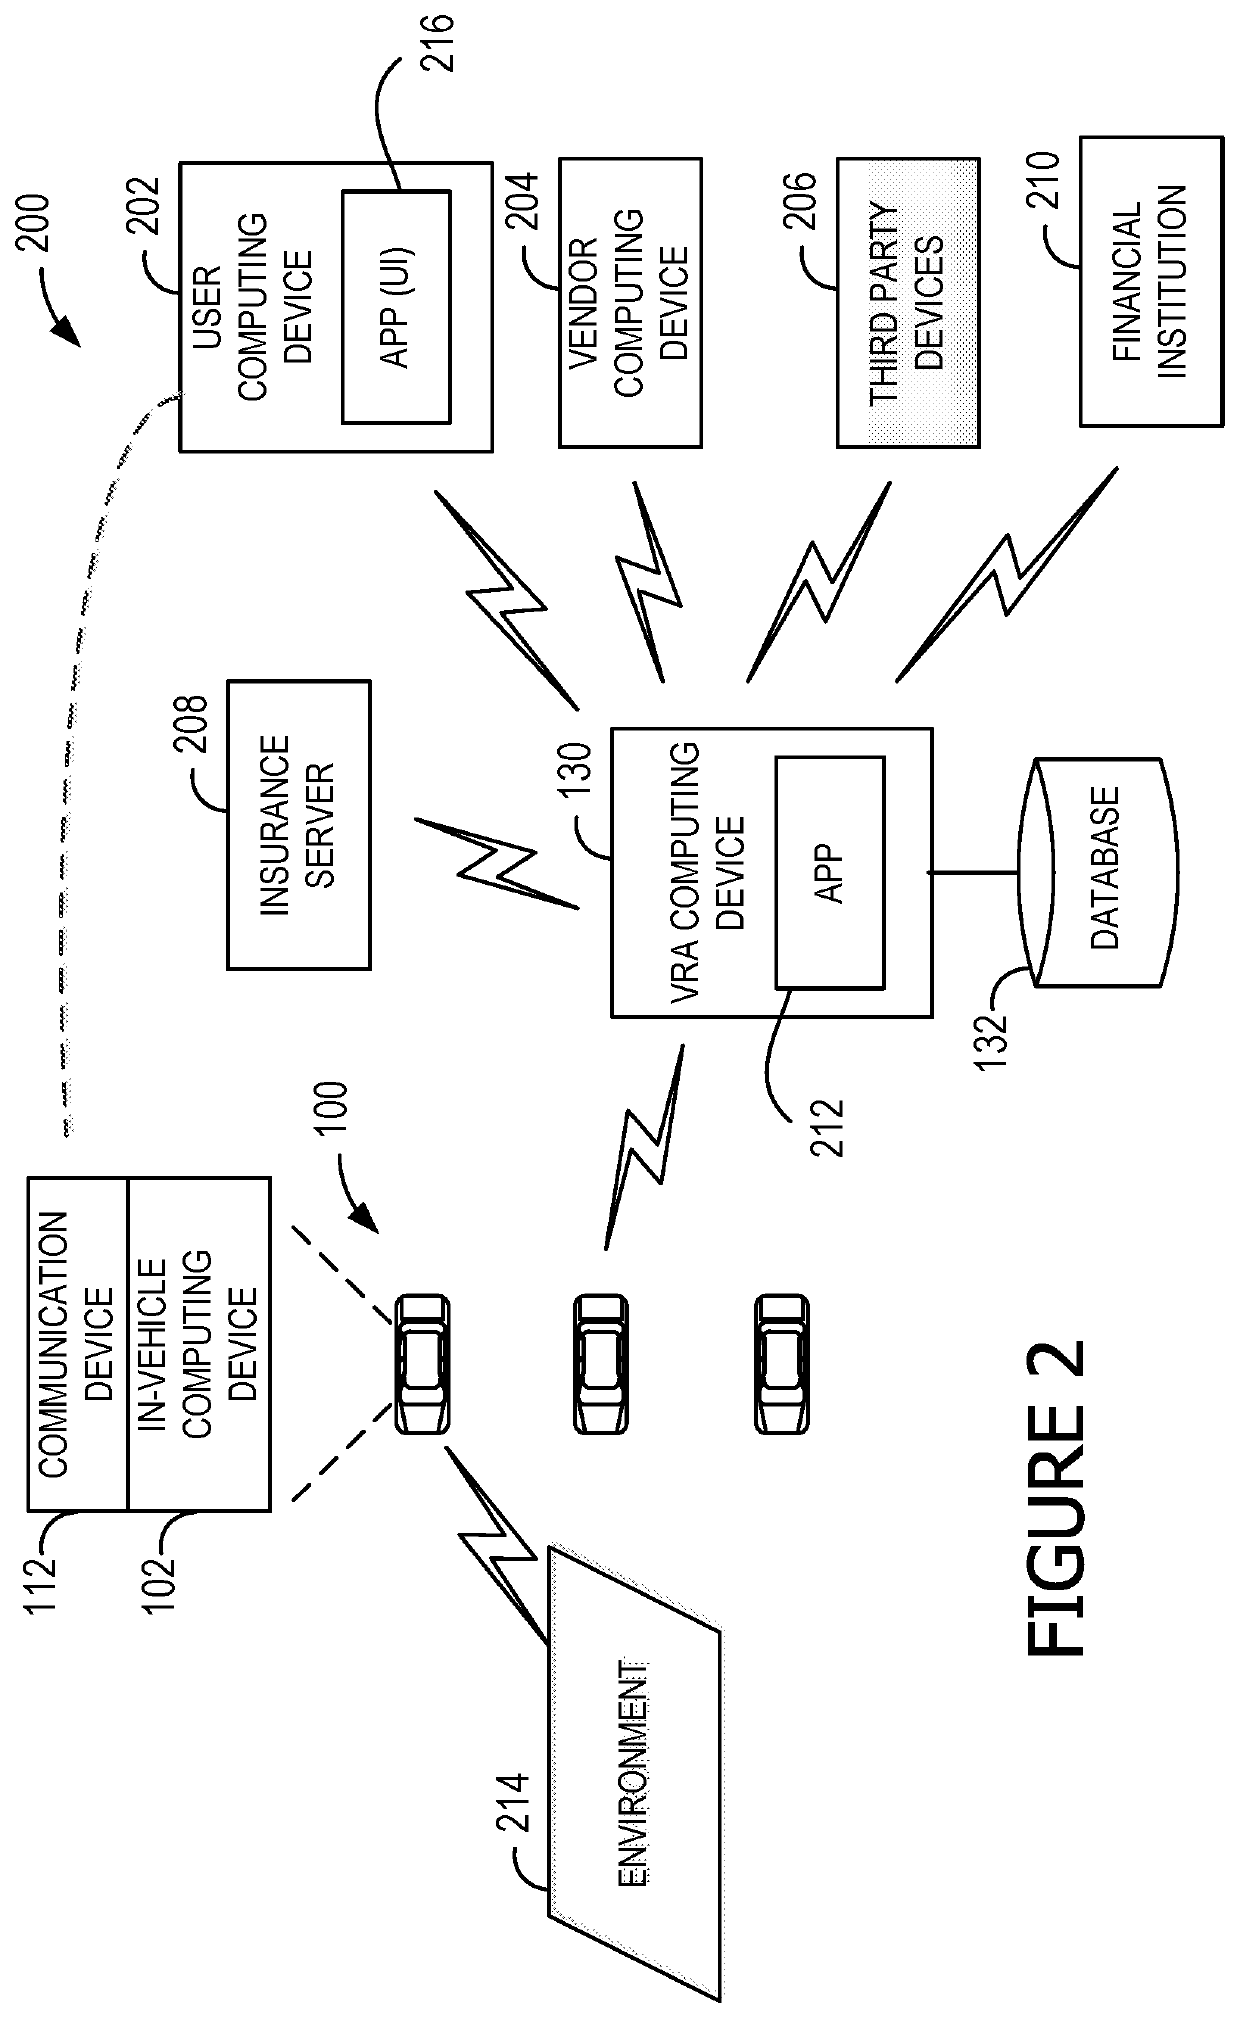 Systems and methods for dynamically generating optimal routes for vehicle delivery management